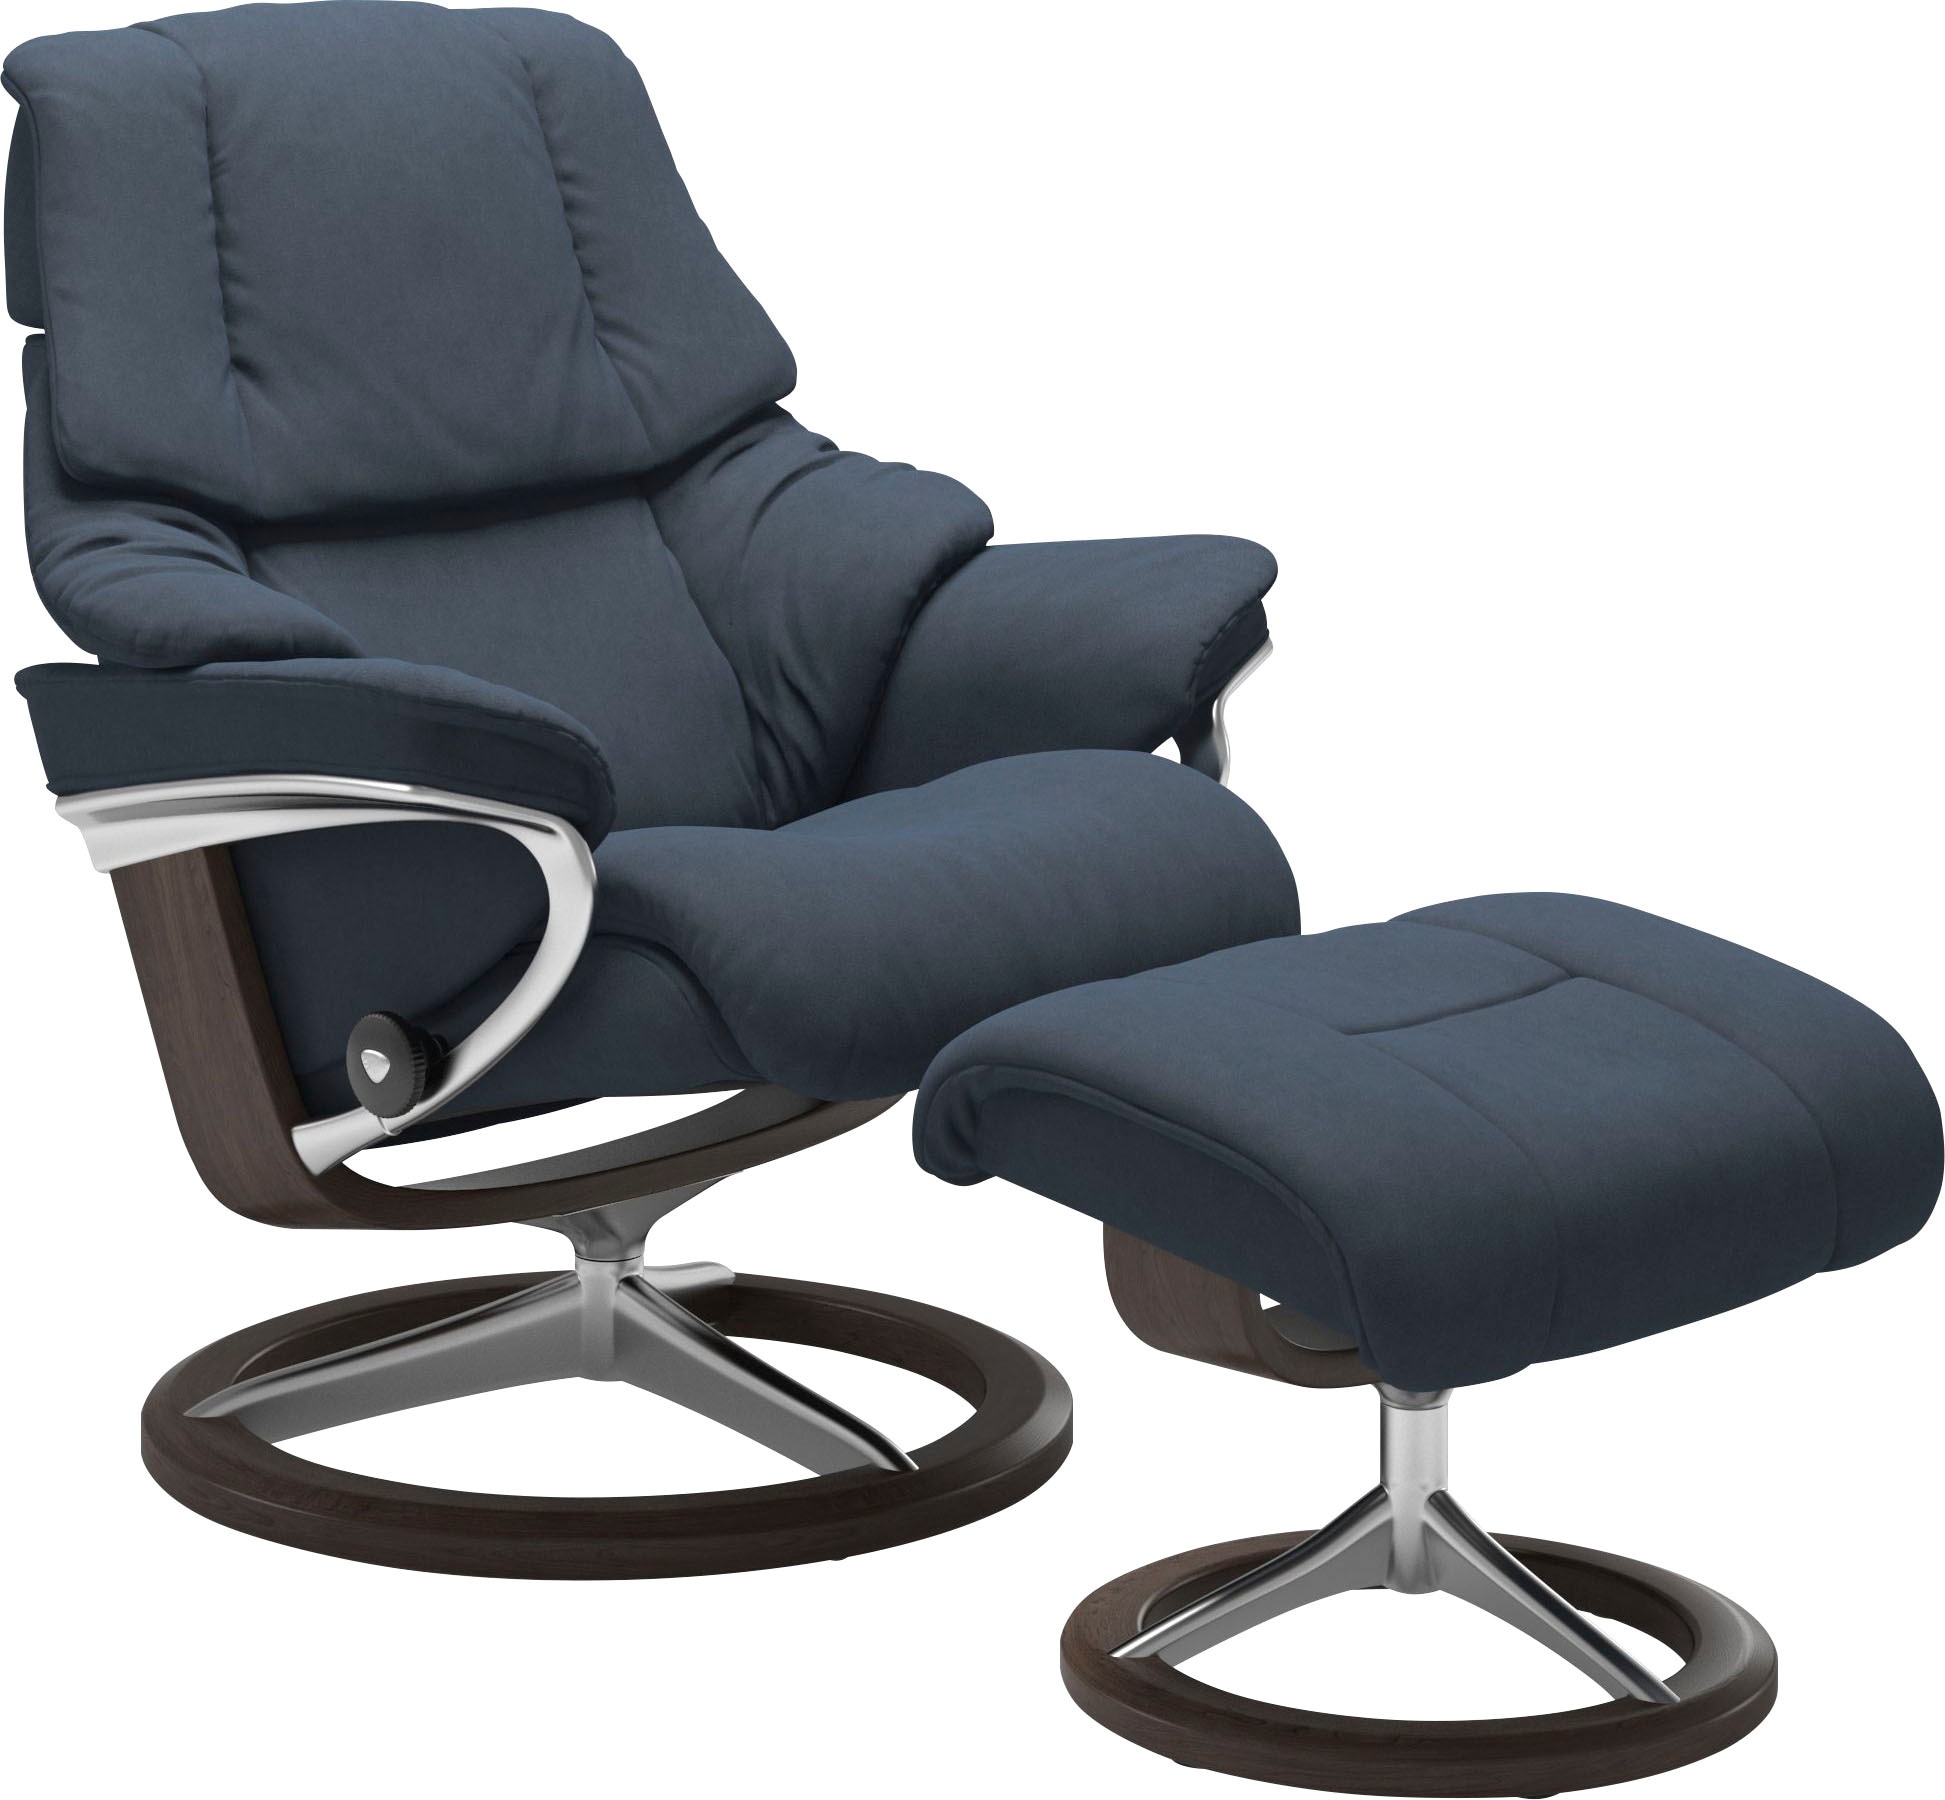 Relaxsessel STRESSLESS "Reno" Sessel Gr. Microfaser DINAMICA, Signature Base Wenge, Relaxfunktion-Drehfunktion-PlusTMSystem-Gleitsystem-BalanceAdaptTM, B/H/T: 92 cm x 100 cm x 80 cm, blau (blue dinamica) Lesesessel und Relaxsessel